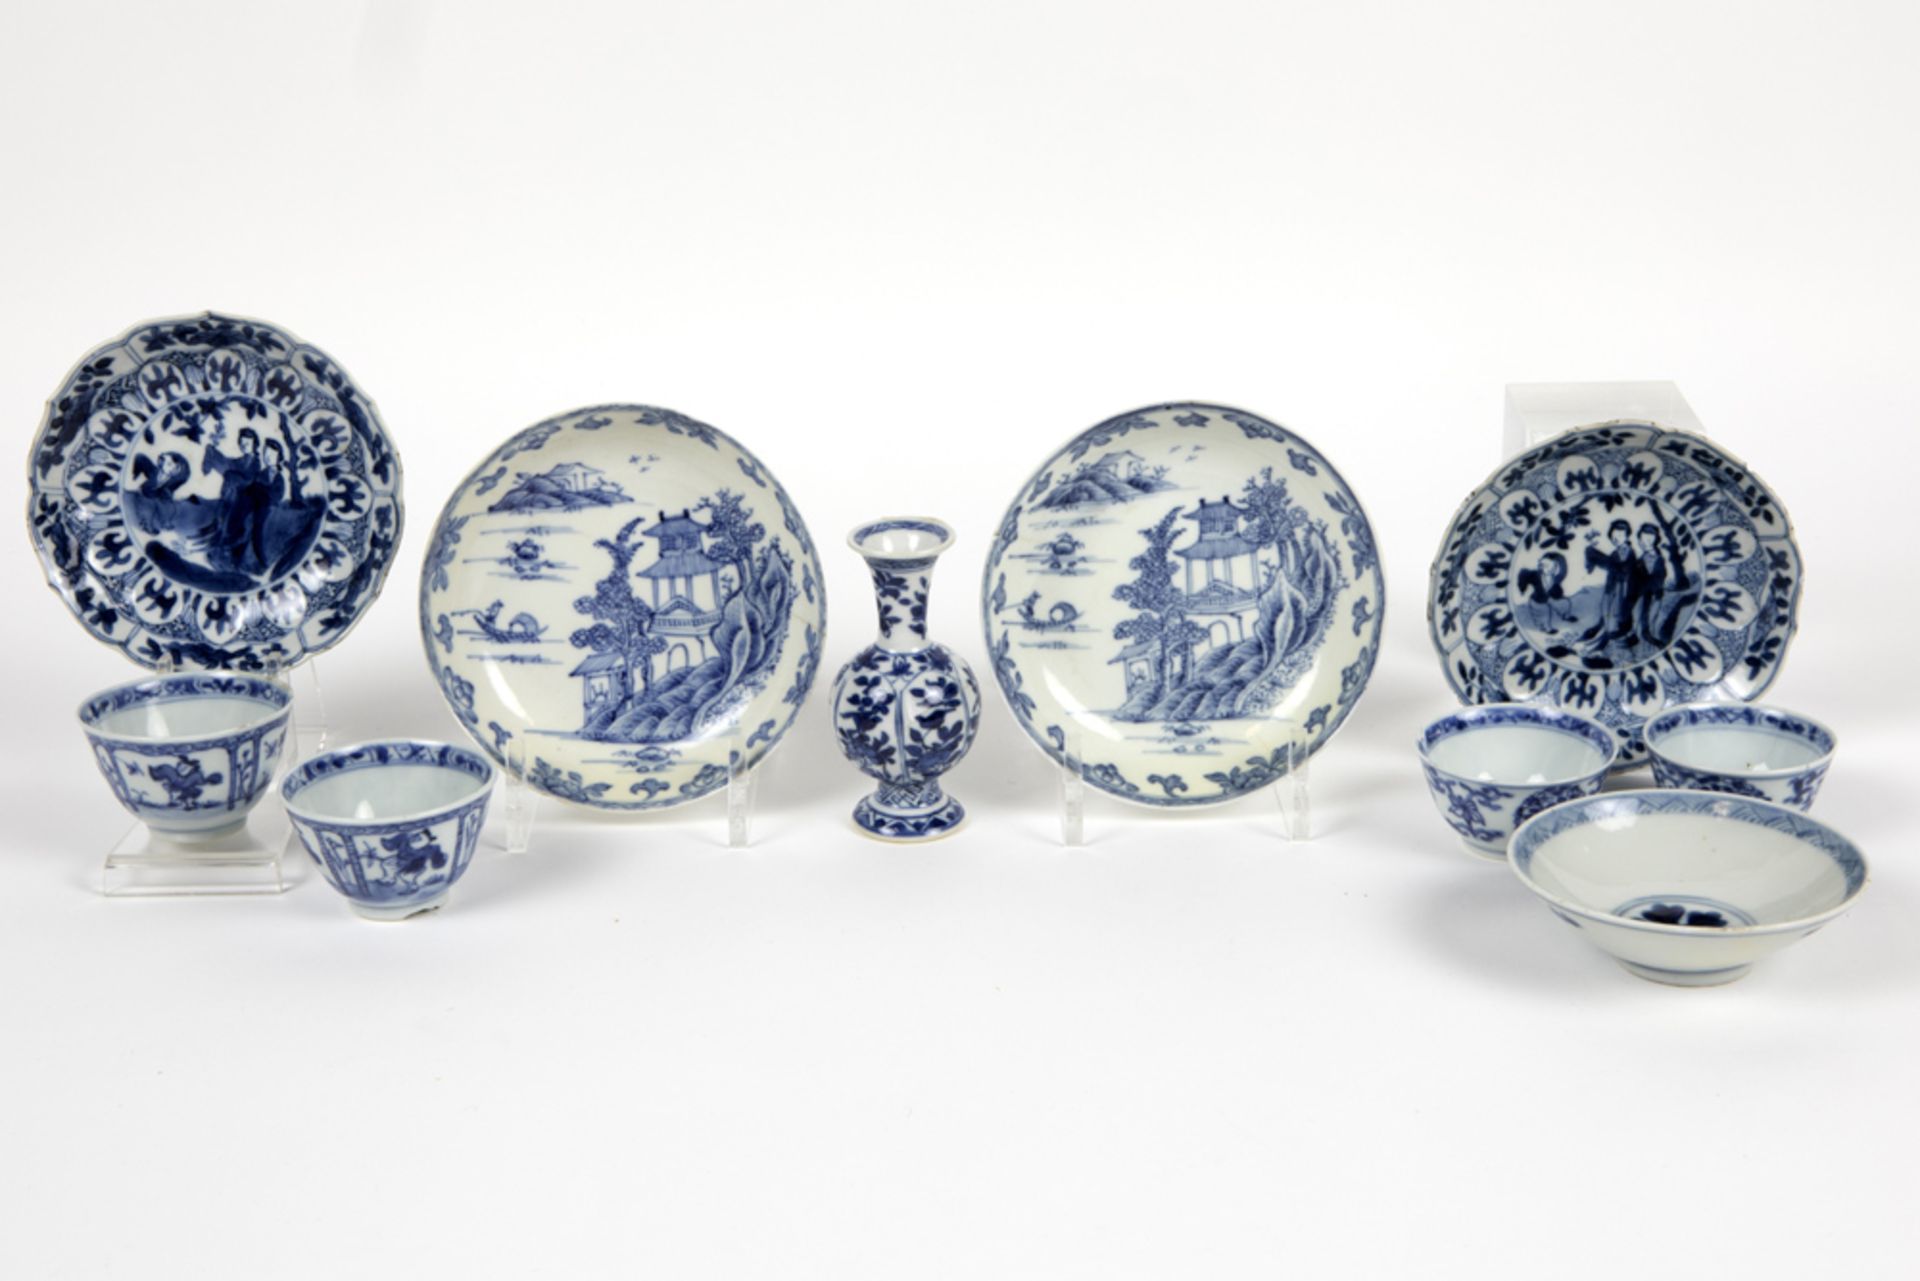 10 pieces of antique (mostly 18th Cent.) Chinese porcelain with a blue-white decor amongst which a